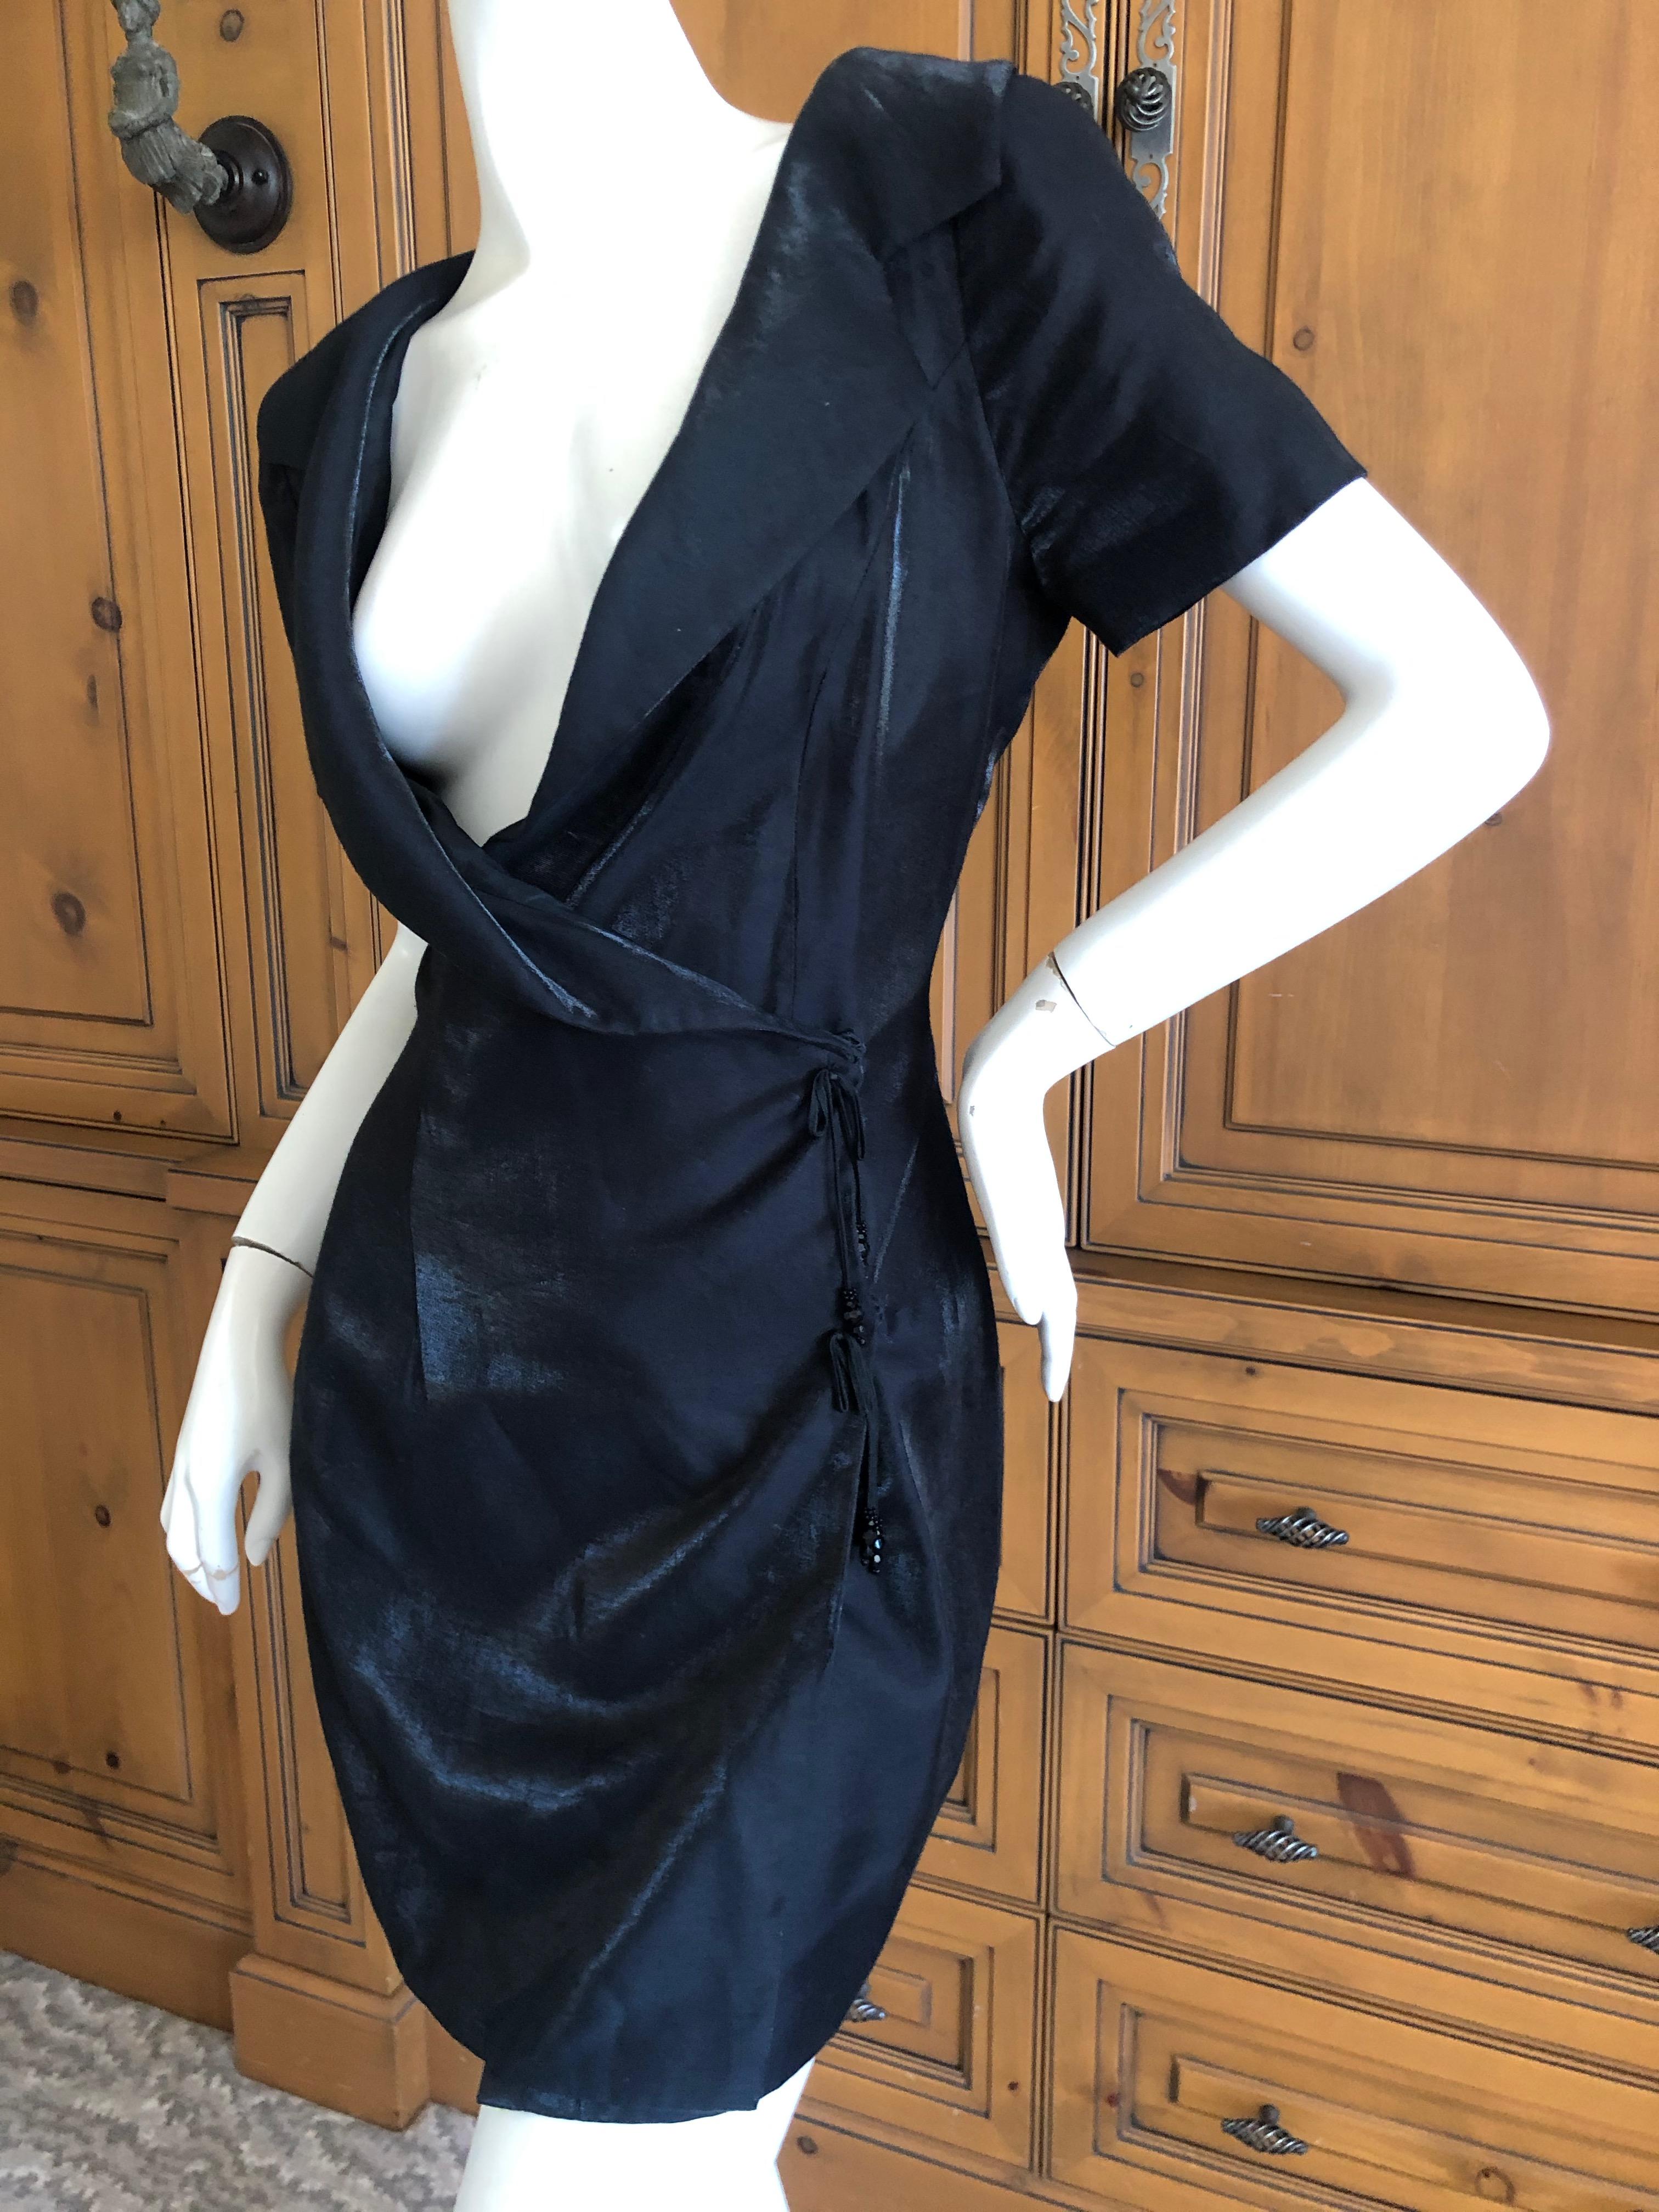 Christian Dior 1992 Numbered Demi Couture Corset Laced Dress by Gianfranco Ferre For Sale 2